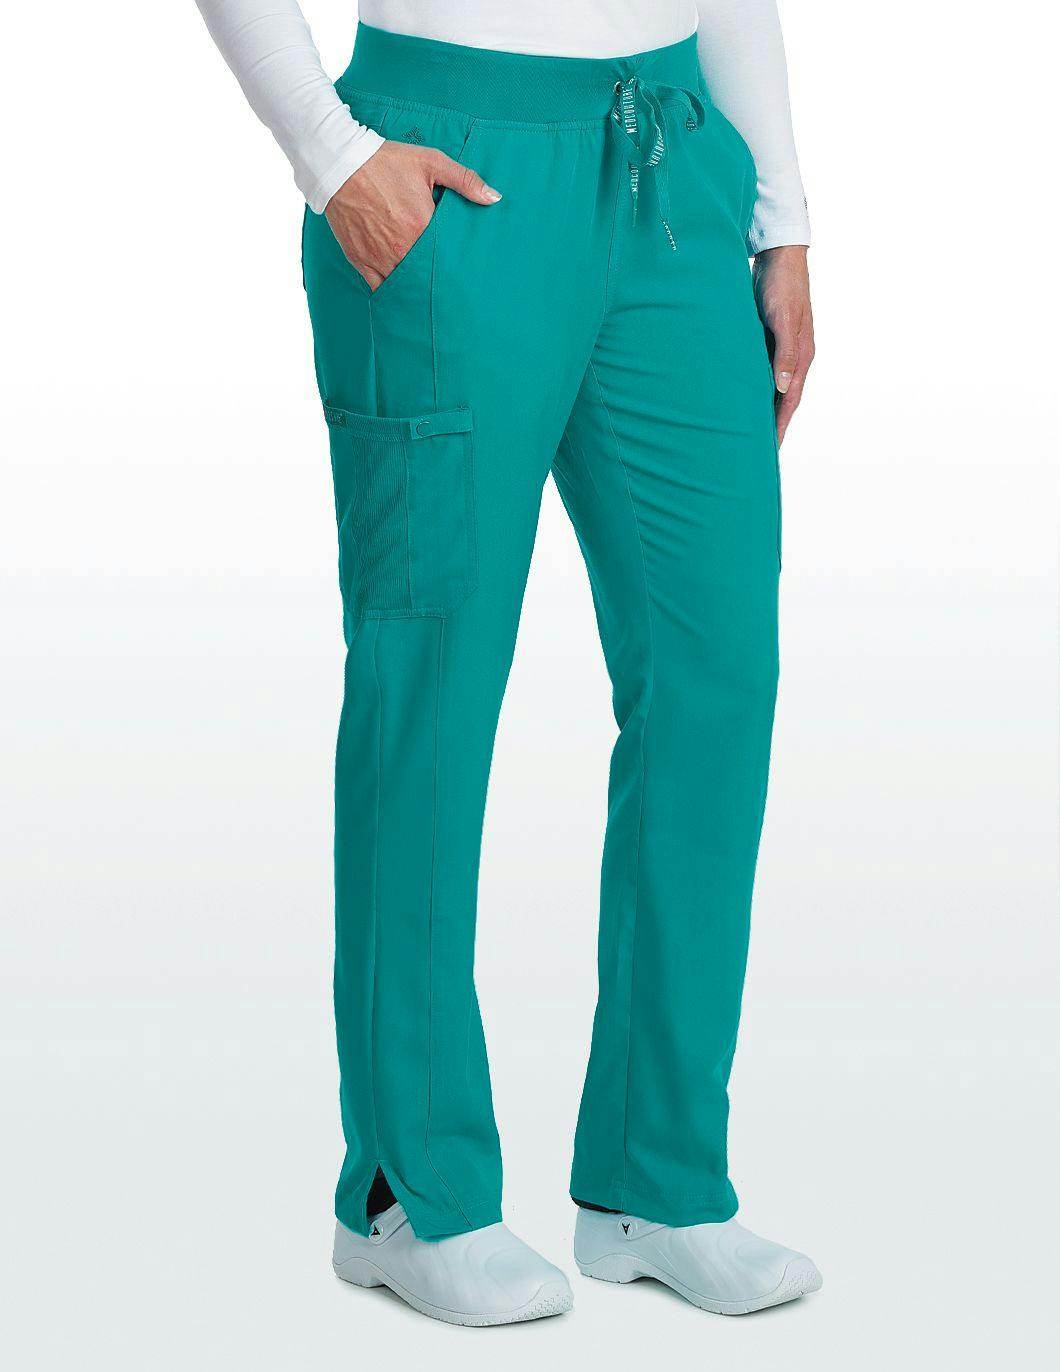 med-couture-touch-yoga-waist-pant-alt